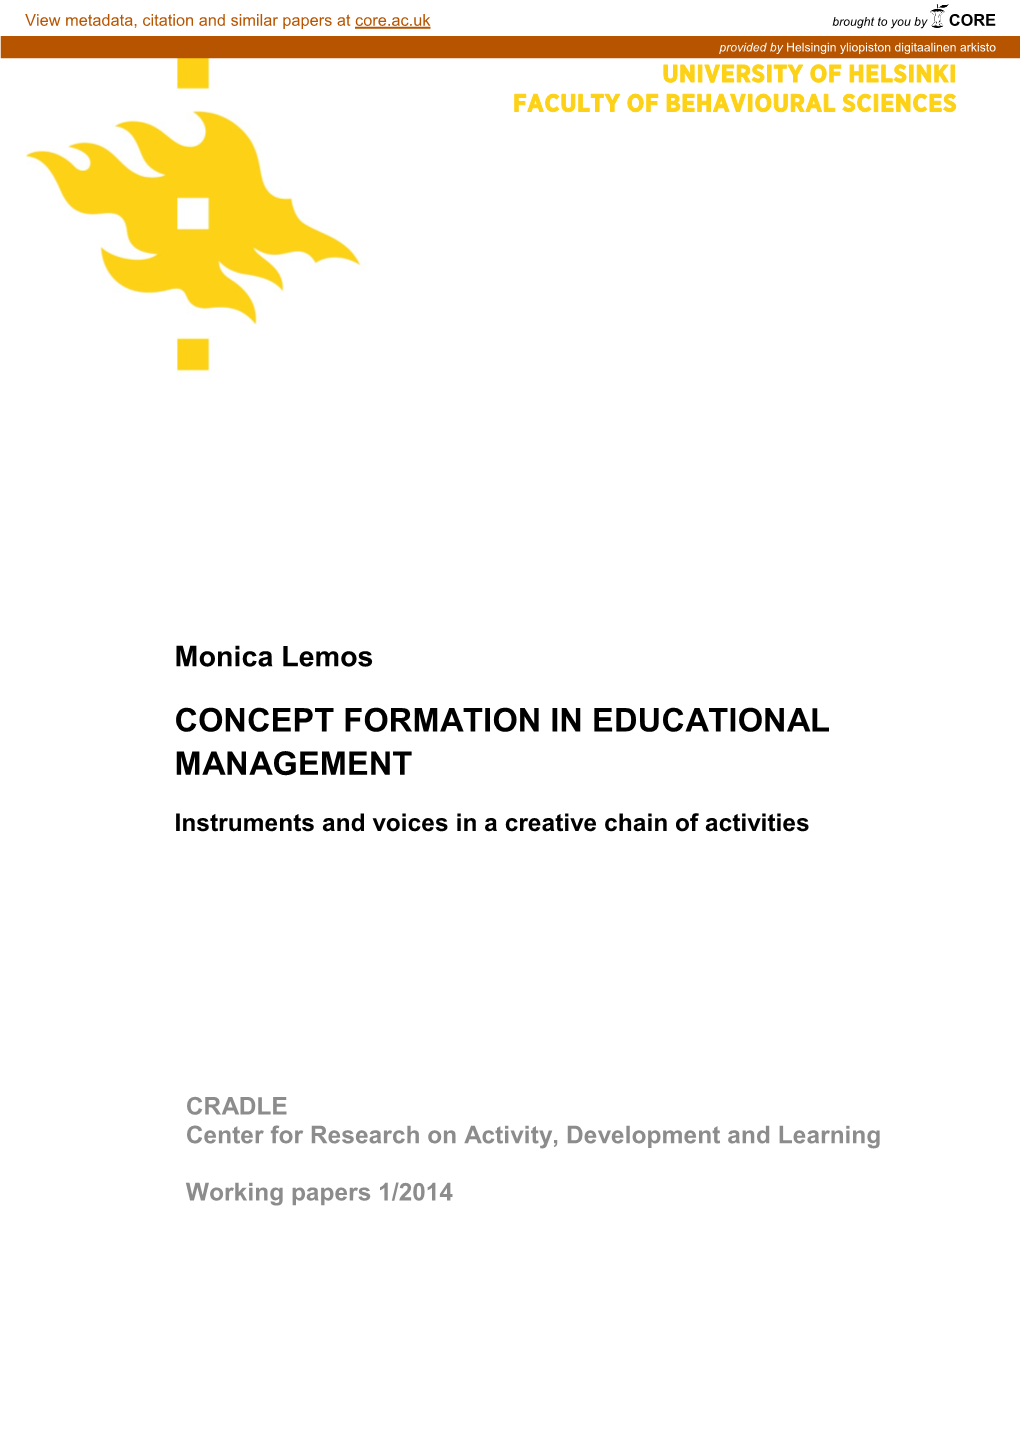 Concept Formation in Educational Management